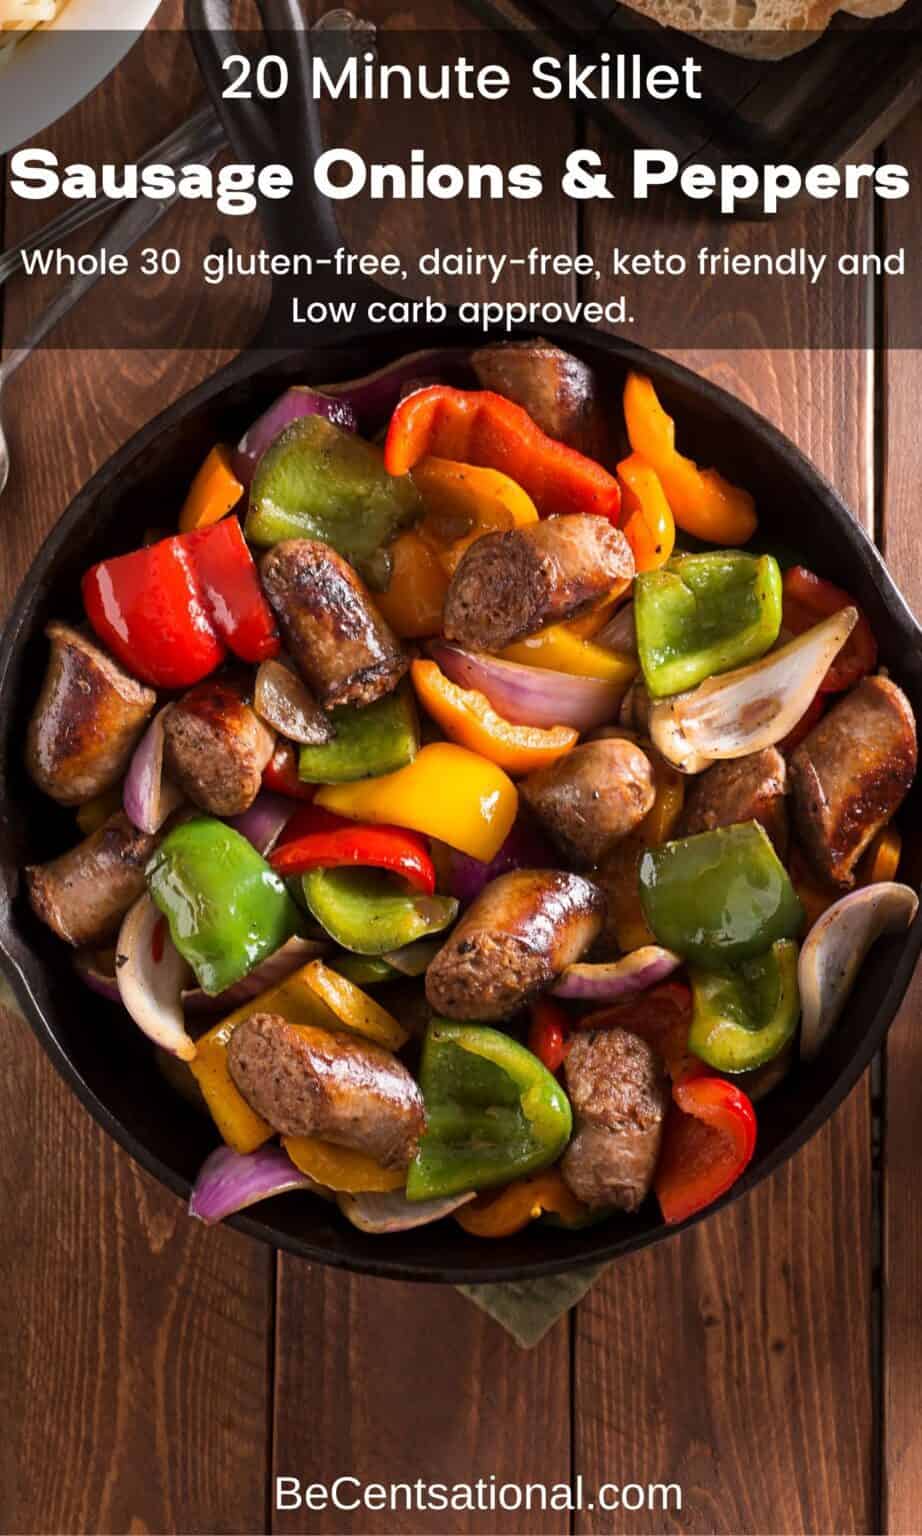 Skillet Sausage with Onions & Peppers - BeCentsational